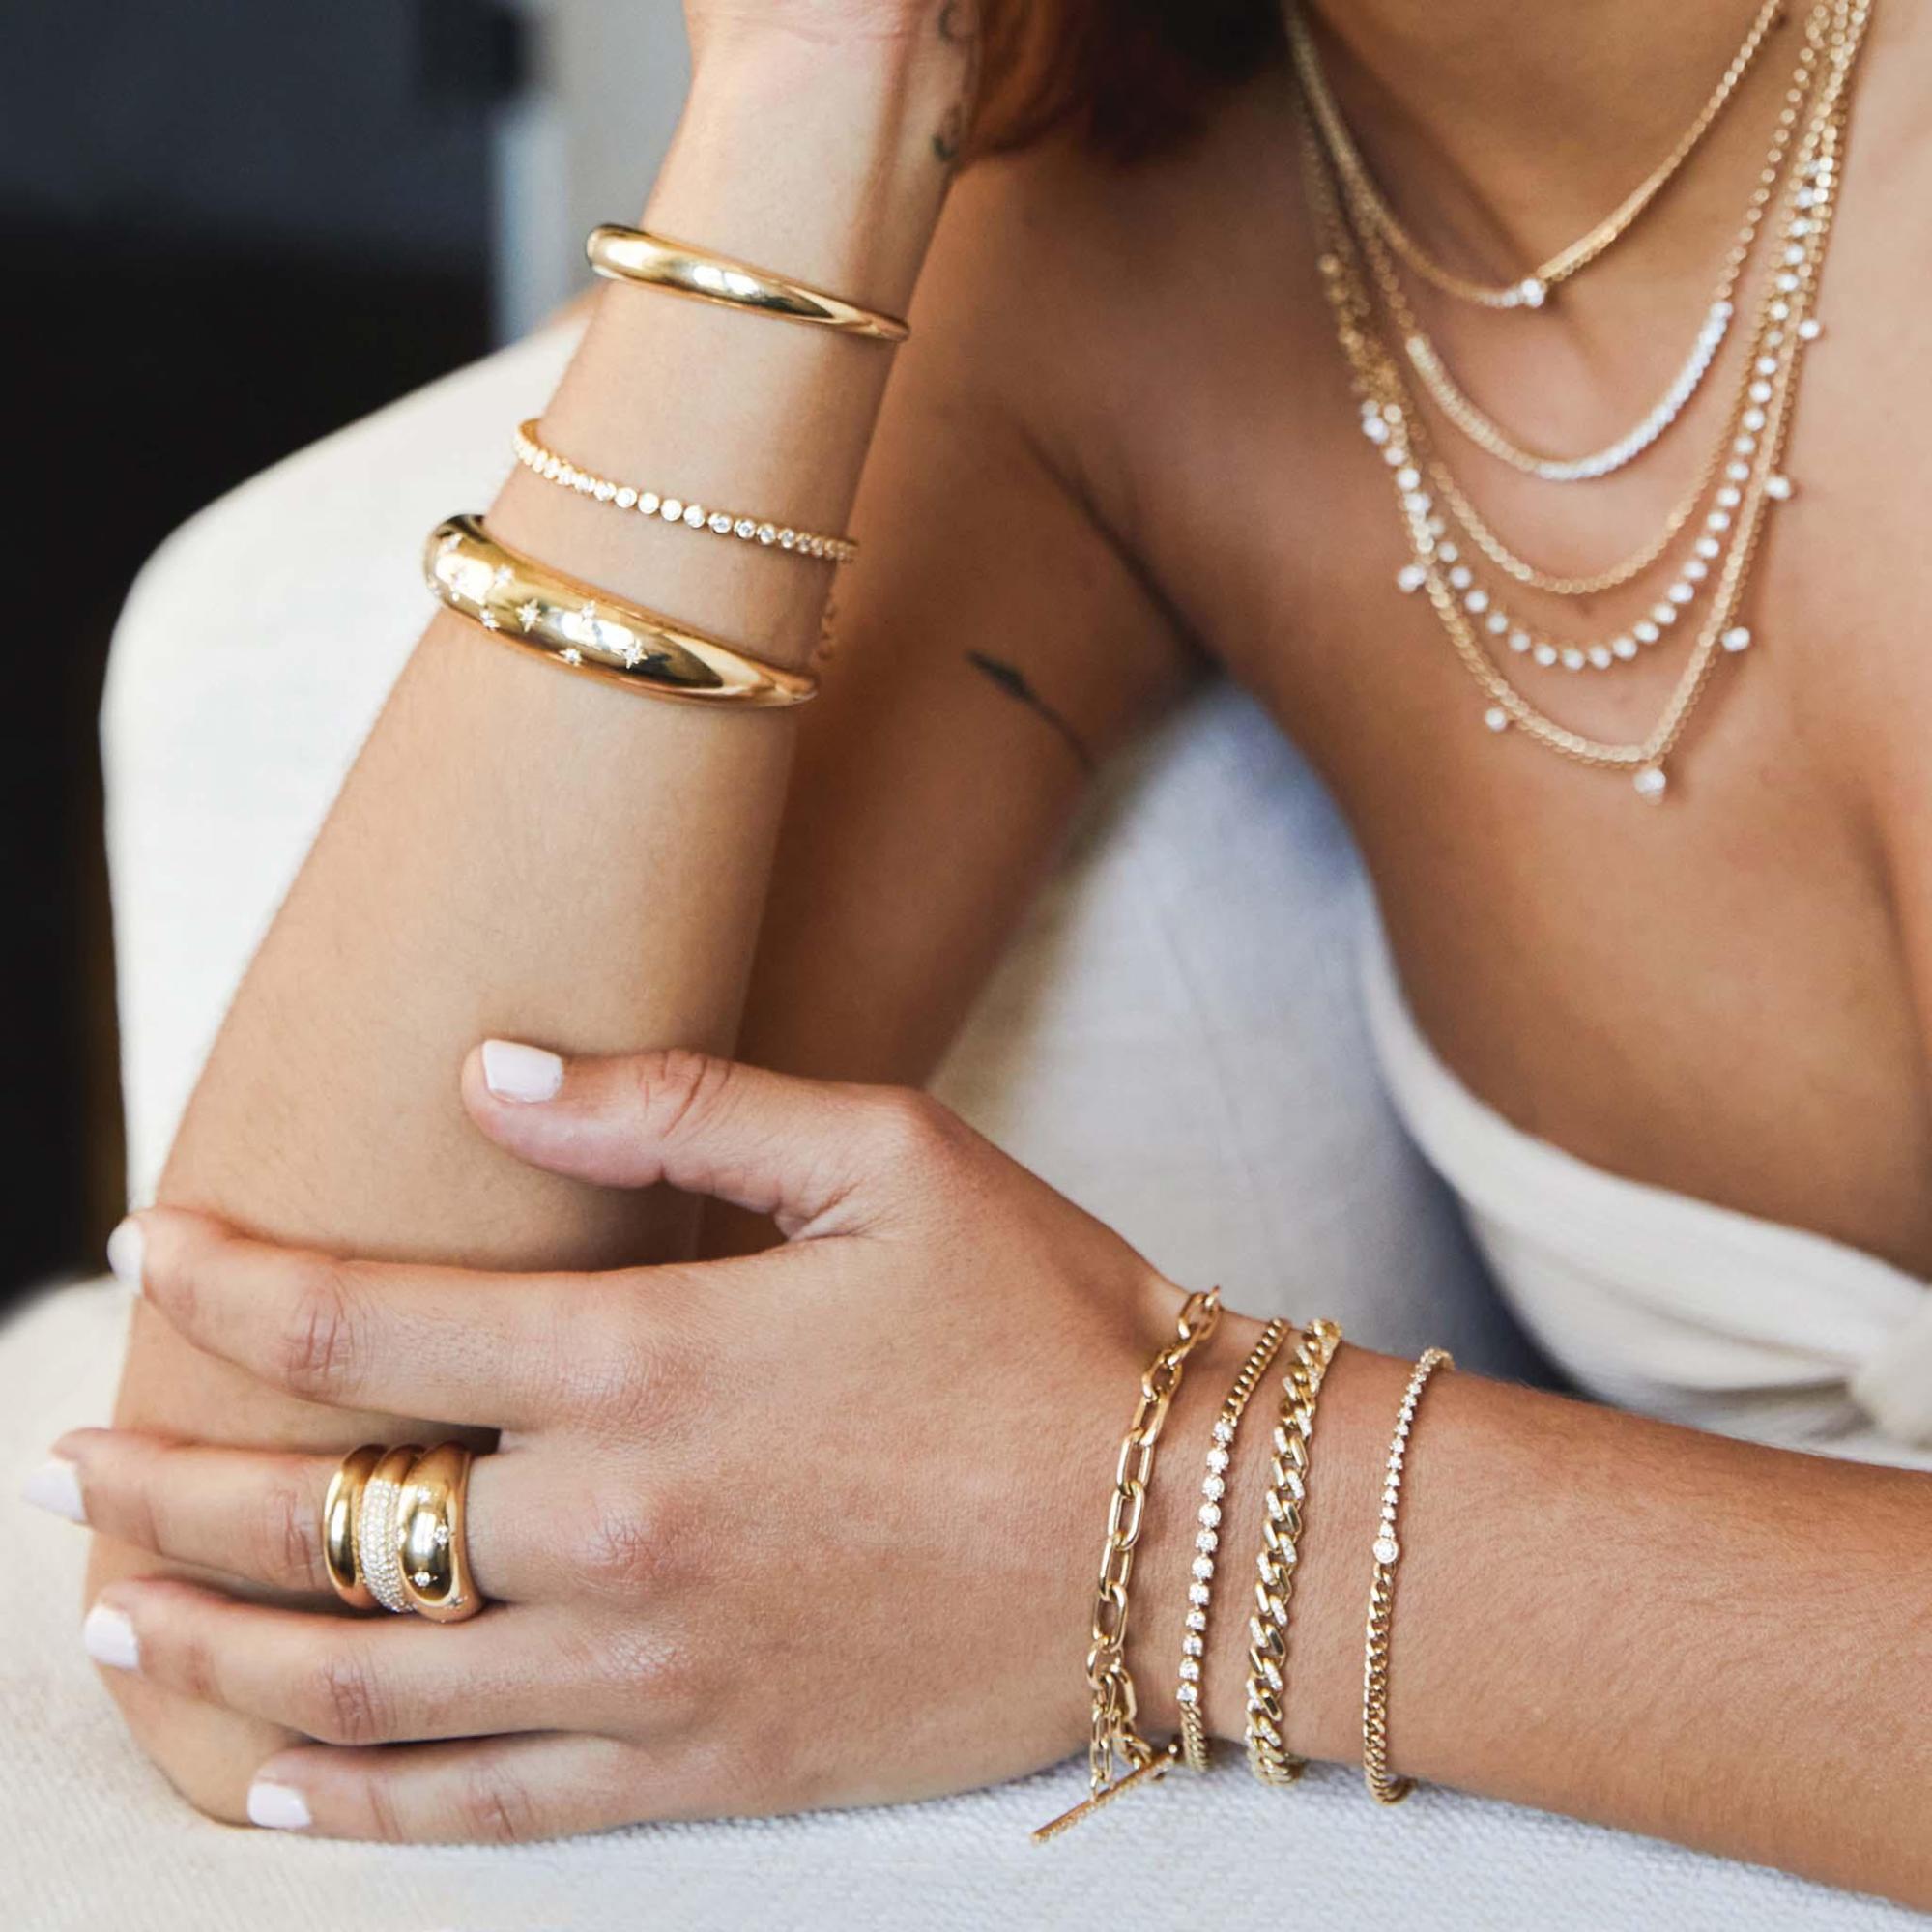 Popular Zoe Chicco Jewelry Collections